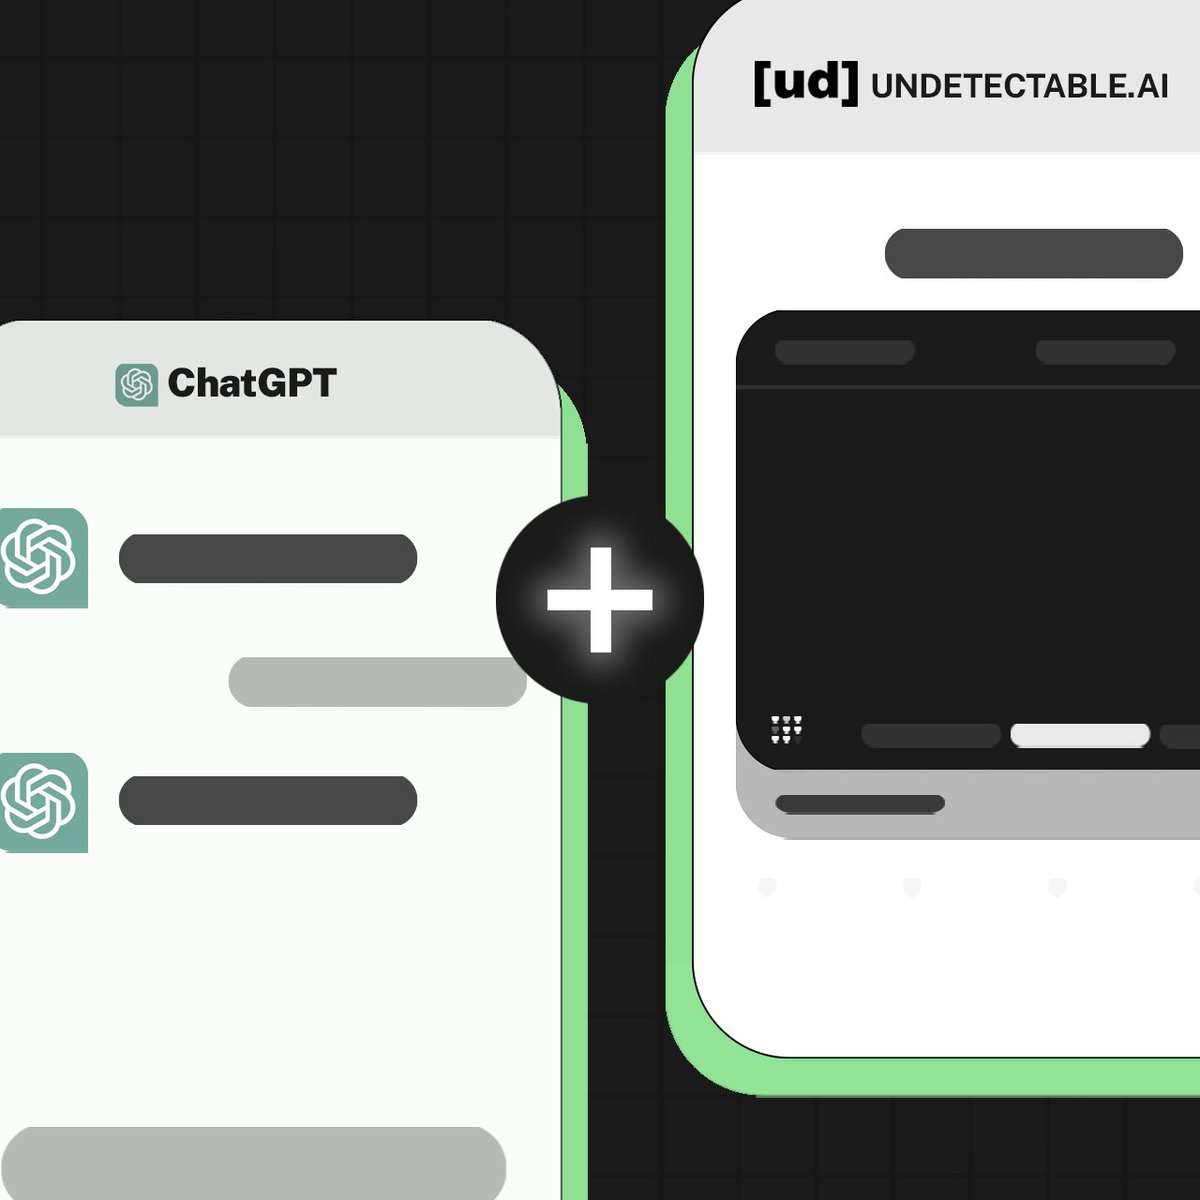 ChatGPT is good, but even better with UndetectableAI. ⚡️#UndetectableAI #AITools #AIDetectors